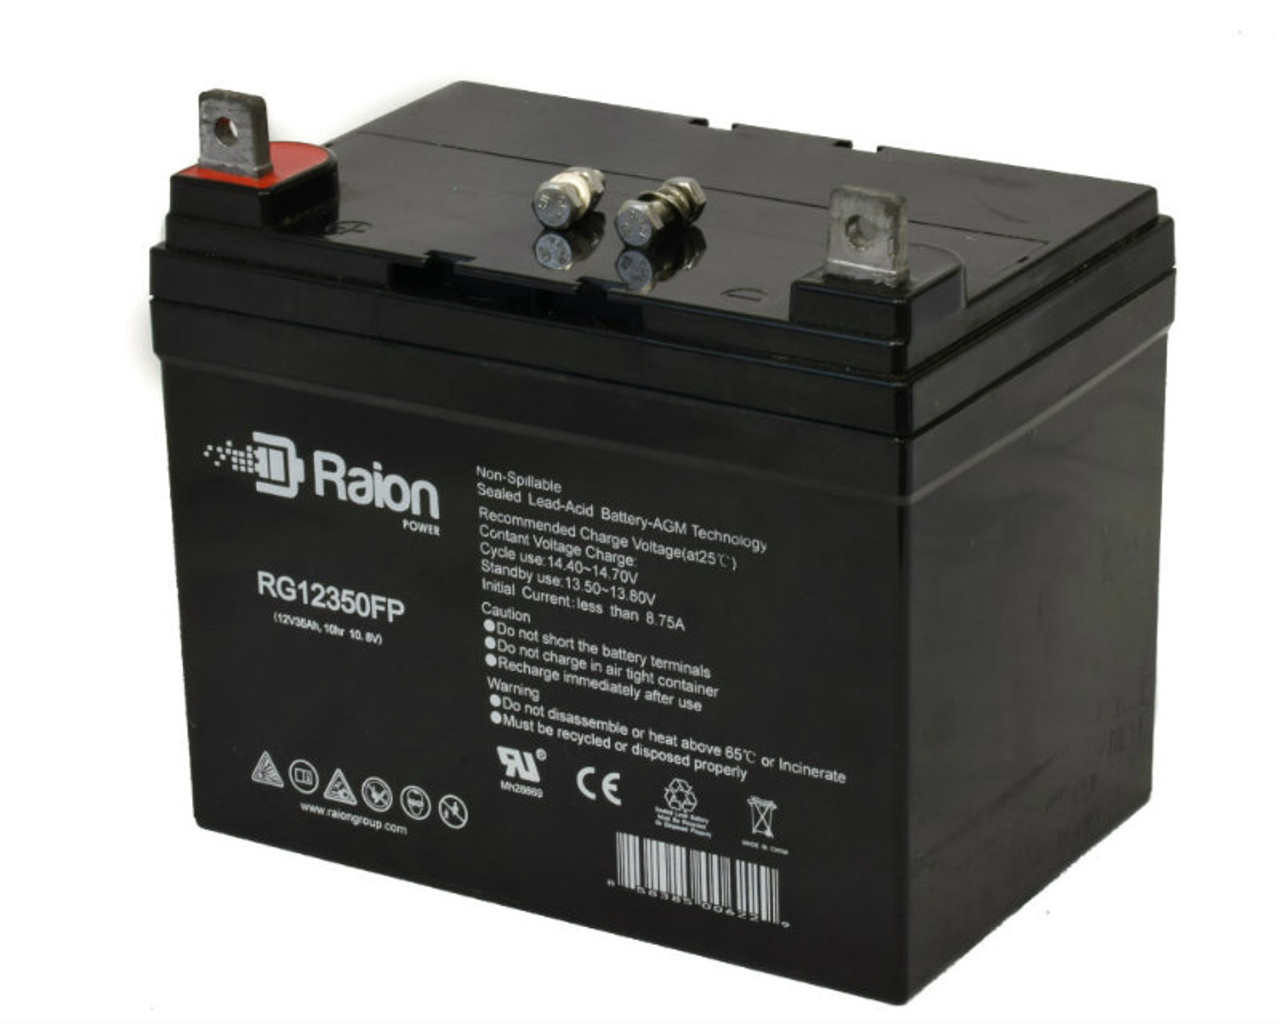 Raion Power Replacement 12V 35Ah RG12350FP Mobility Scooter Battery for Golden Technologies Compass GP600